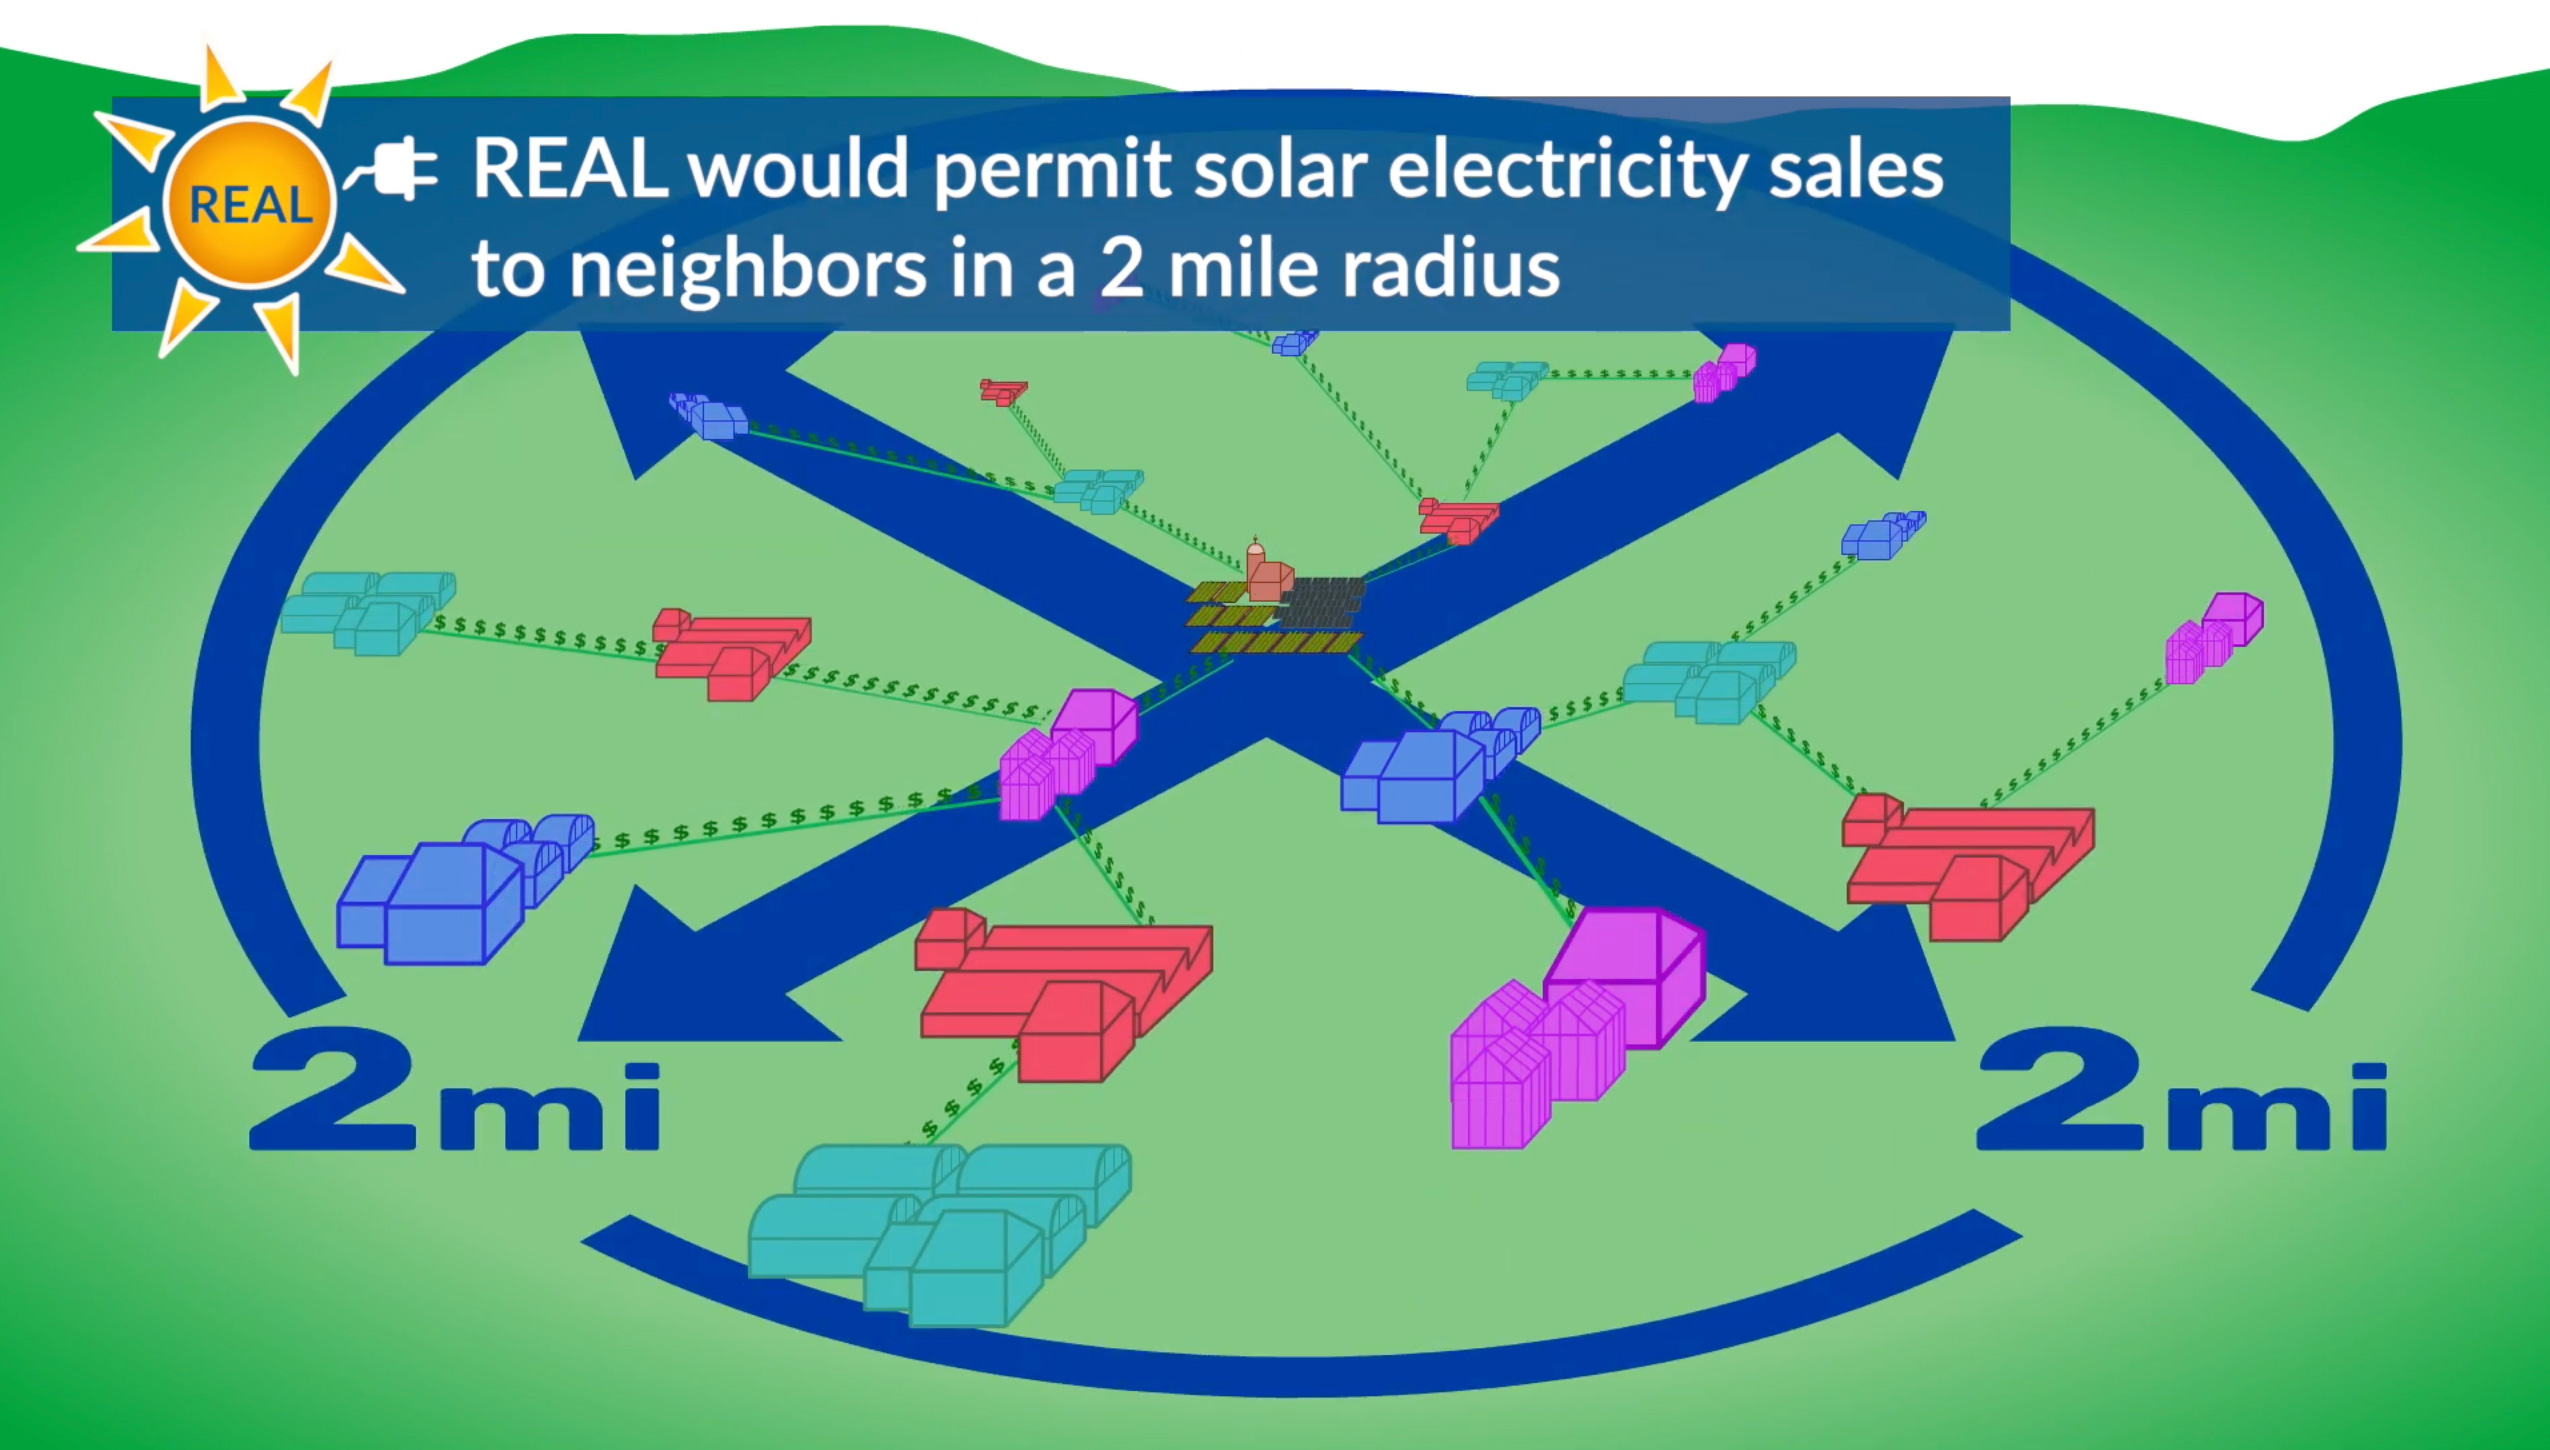 https://realclimatesolution.com/wp-content/uploads/2023/08/real-permit-solar-electricity.jpg